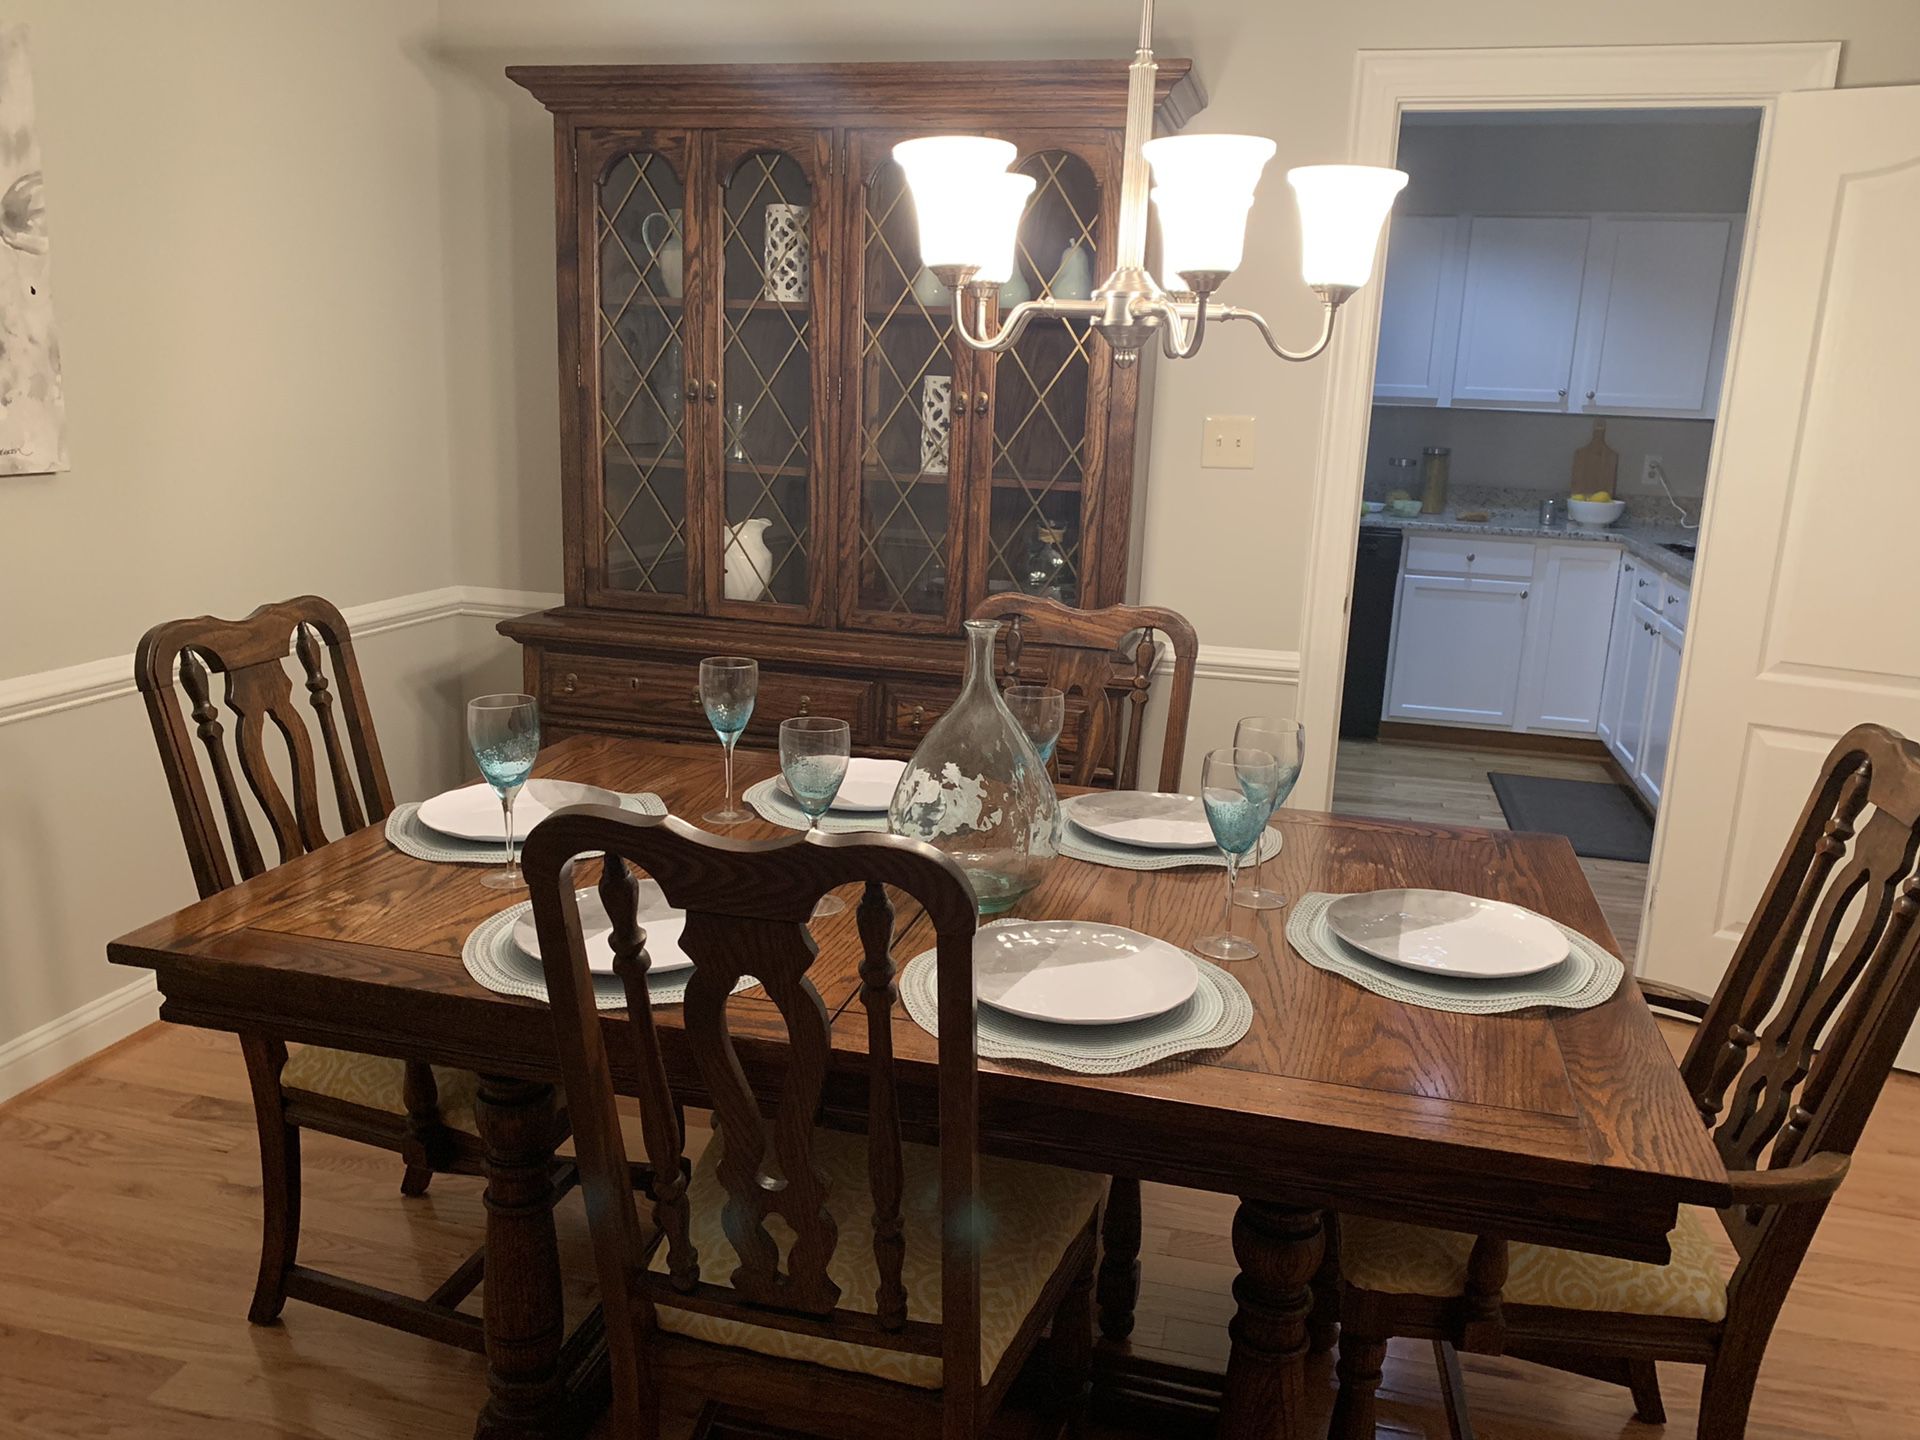 Formal dining table with 6 chairs and a leaf